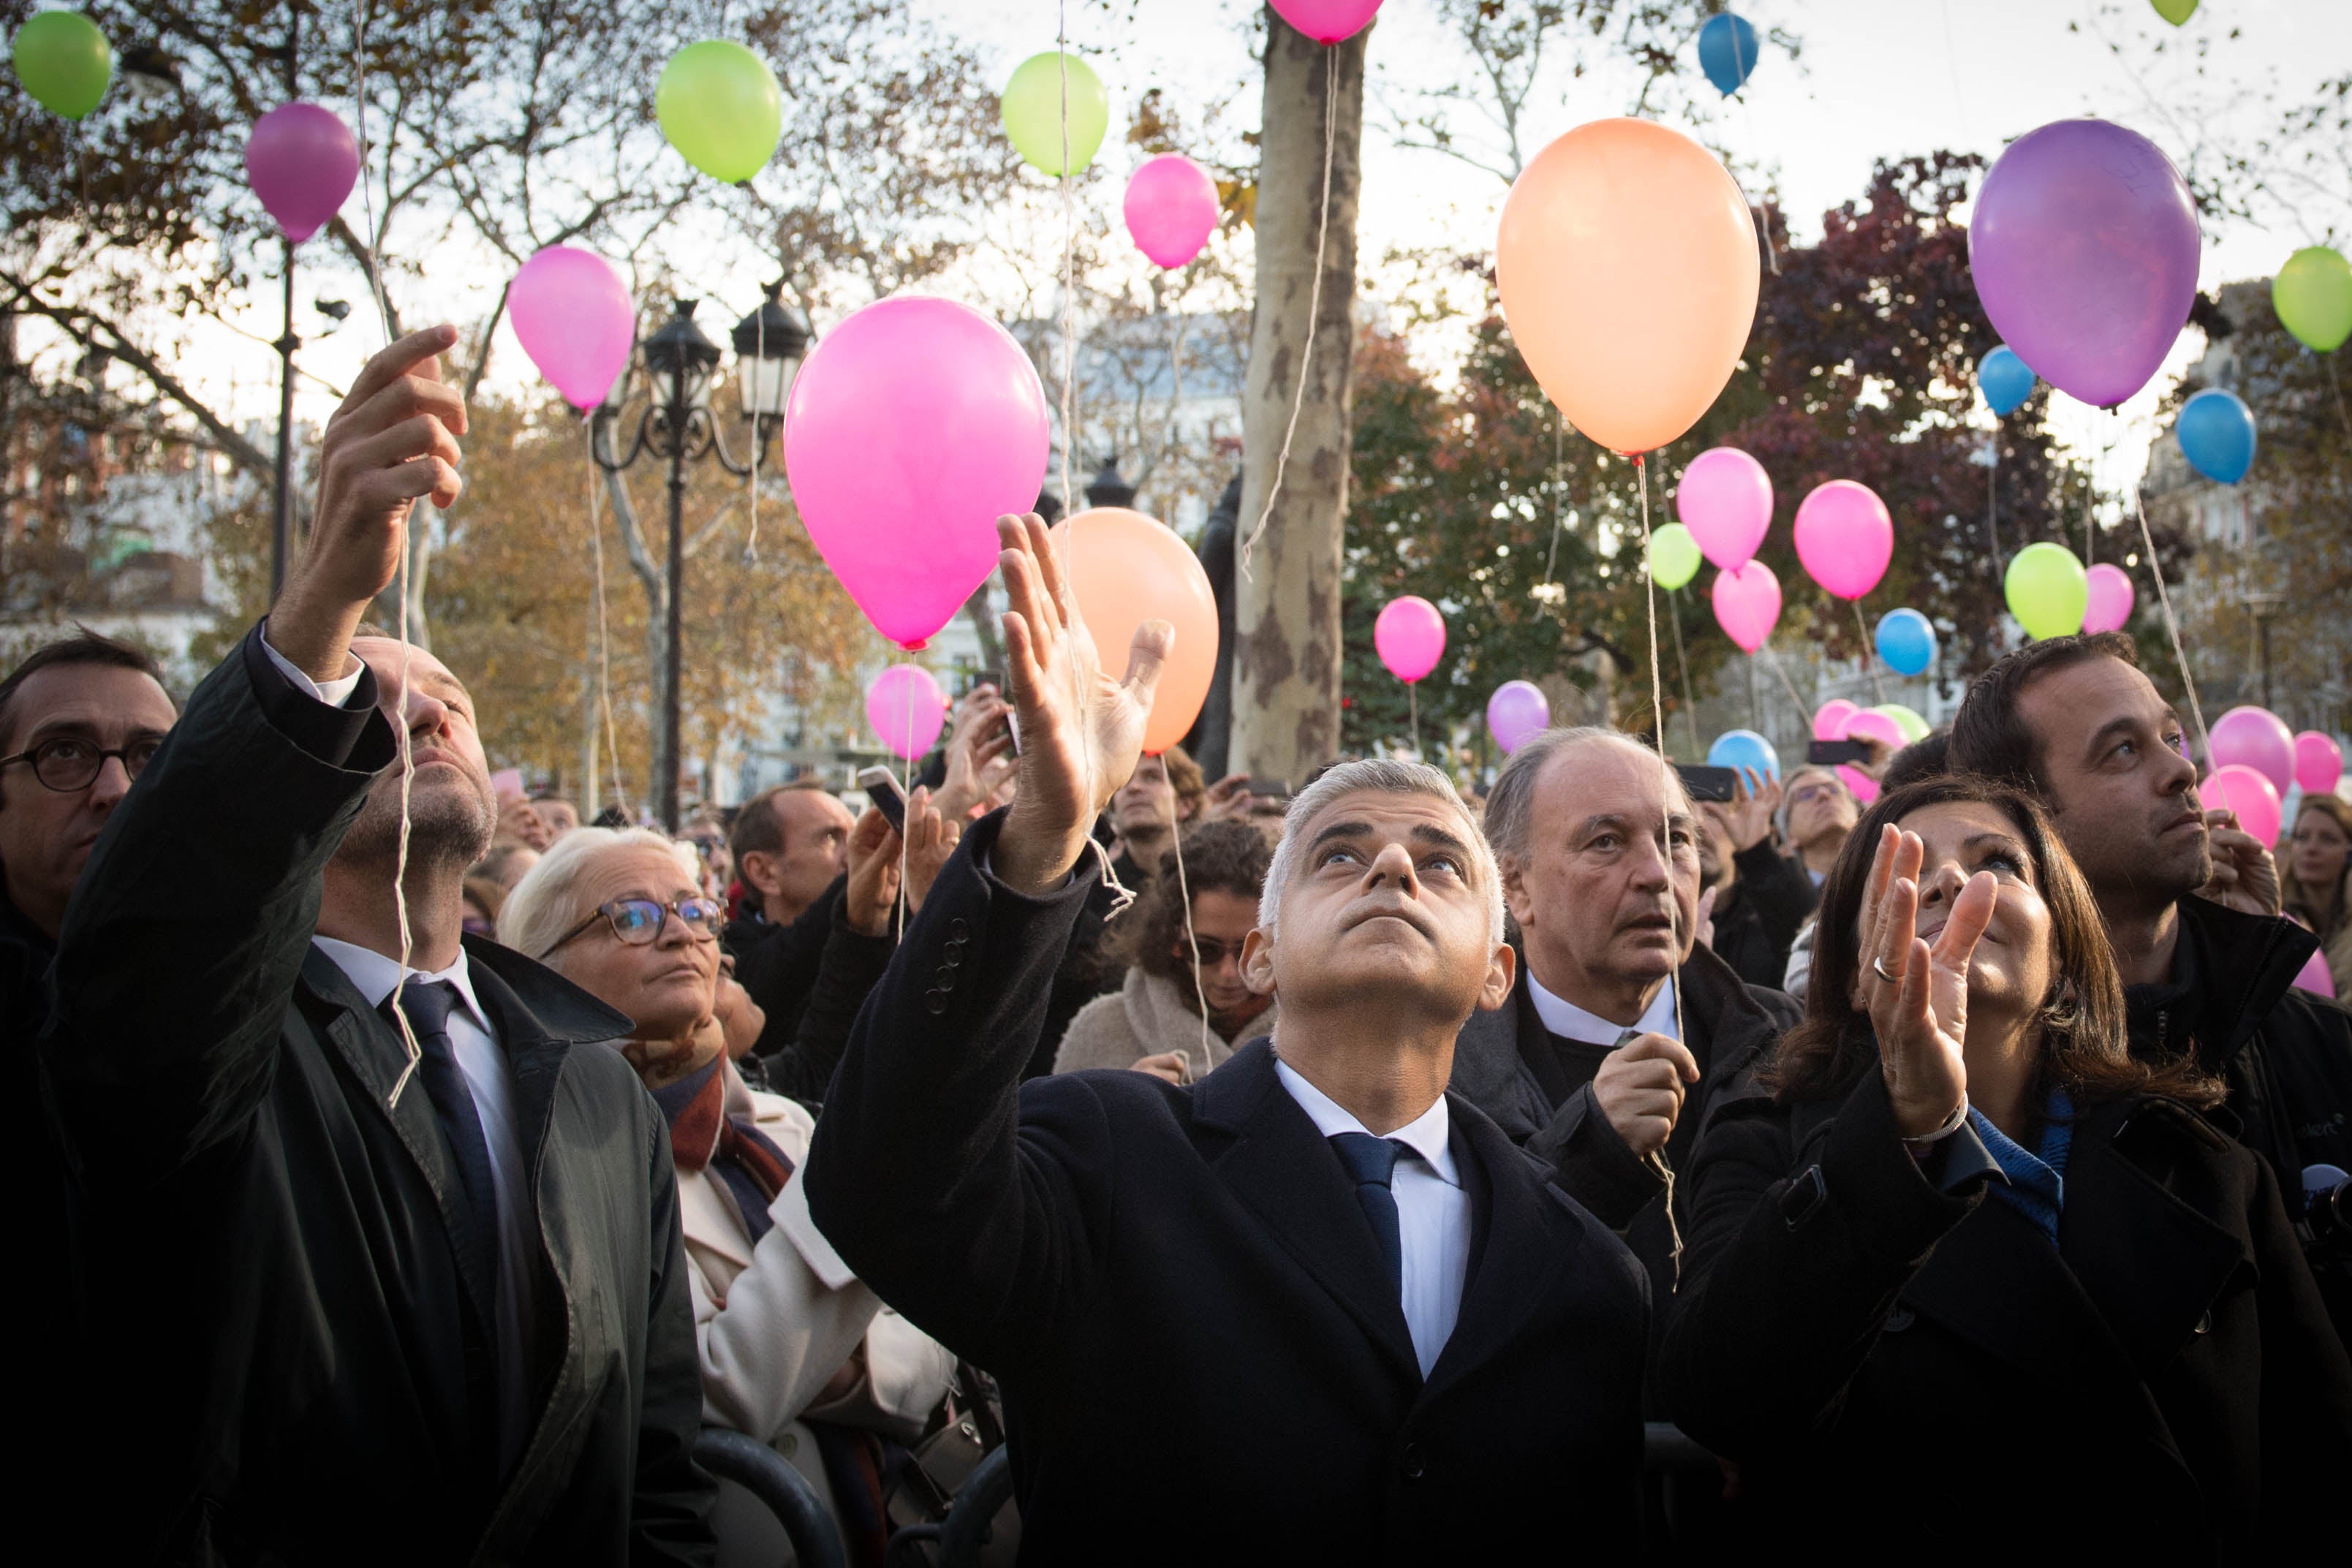 Mayor of London Sadiq Khan and his Parisian counterpart, Anne Hidalgo, attend a memorial service to mark the third anniversary of the 2015 Bataclan terrorist attack in Paris (Stefan Rousseau/PA)